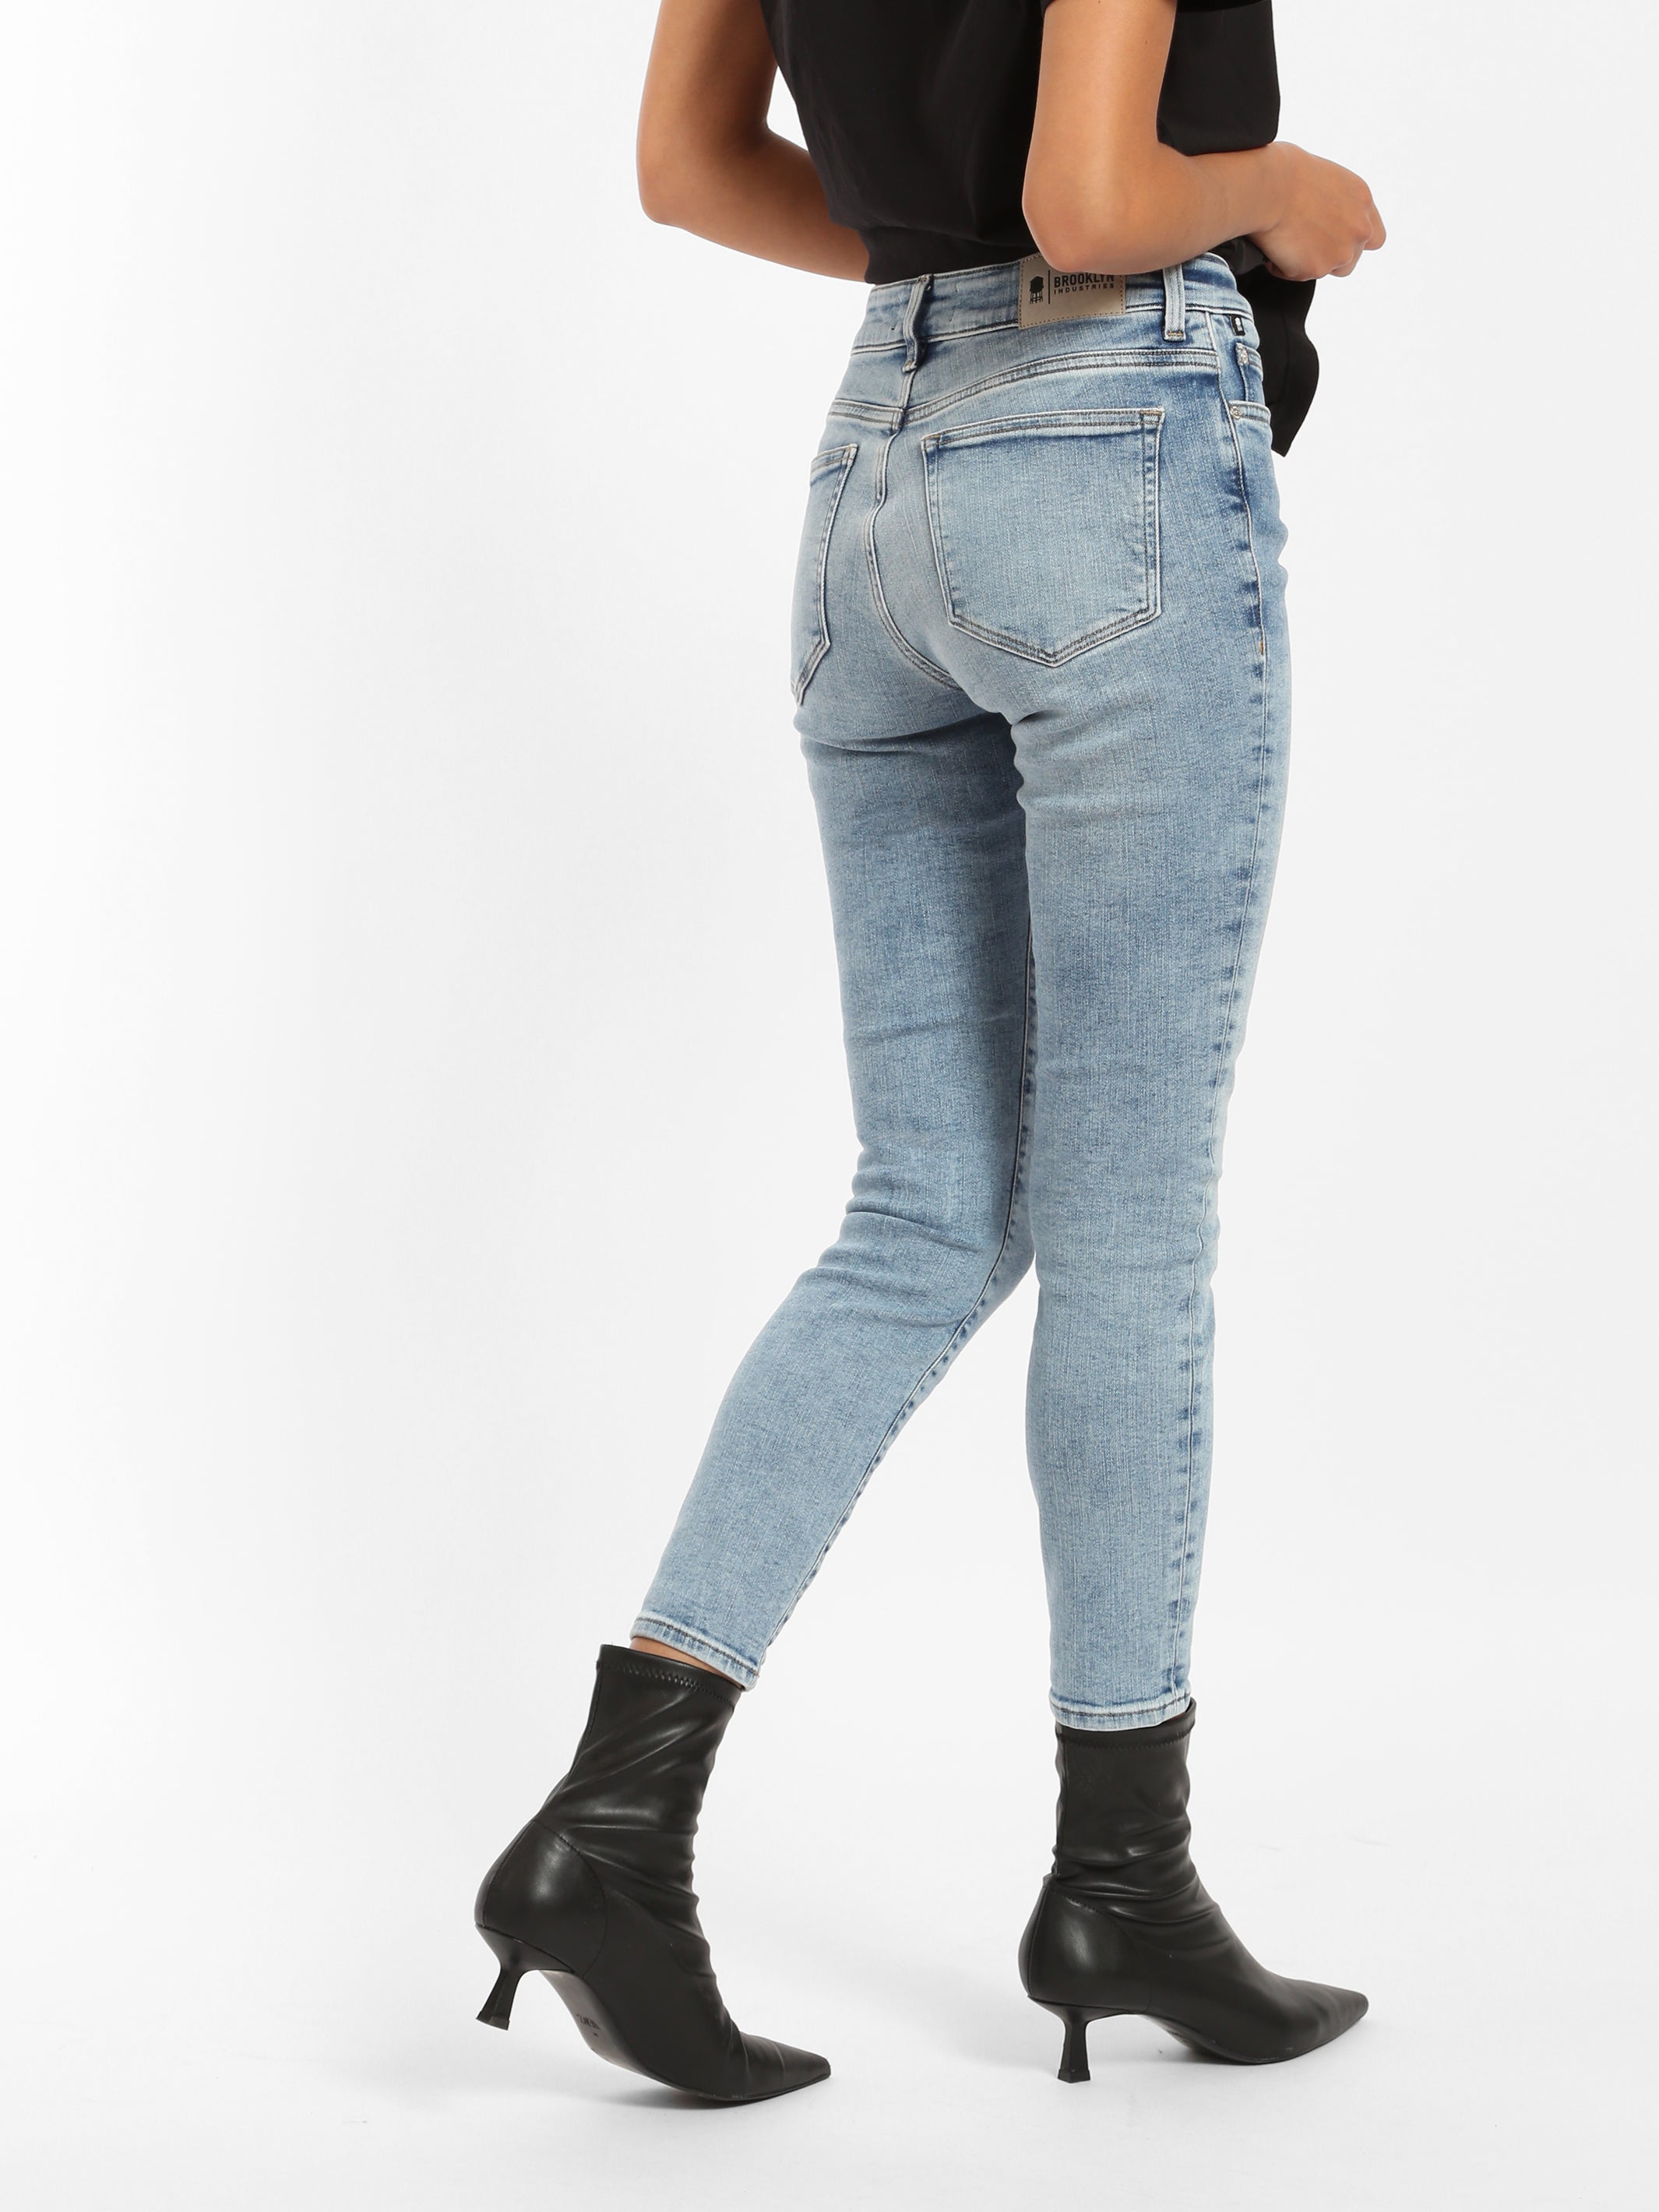 Coco High Rise Skinny Jeans in Light Brushed Denim - BROOKLYN INDUSTRIES